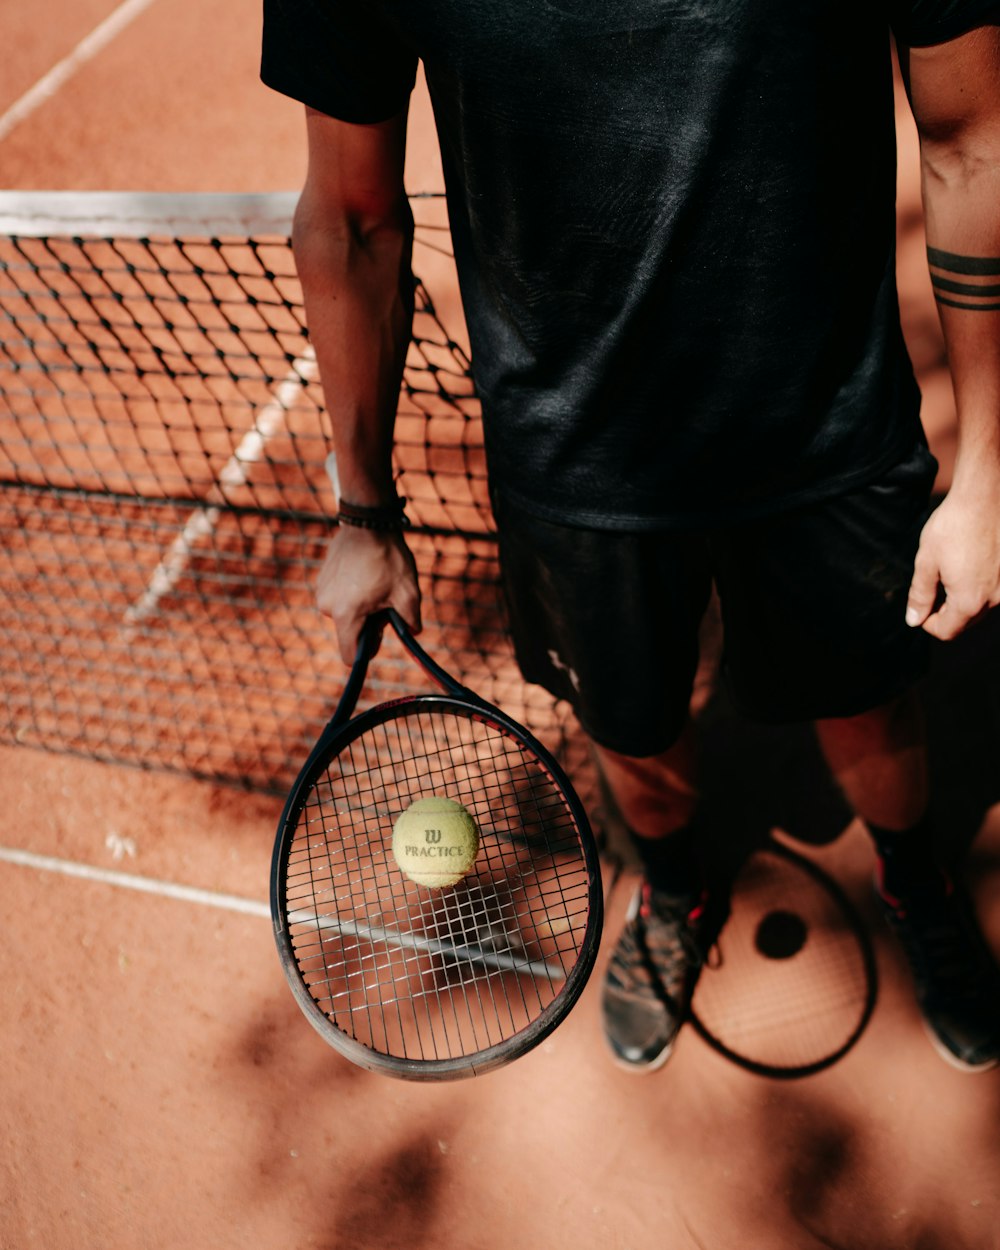 person in black shorts holding green tennis racket